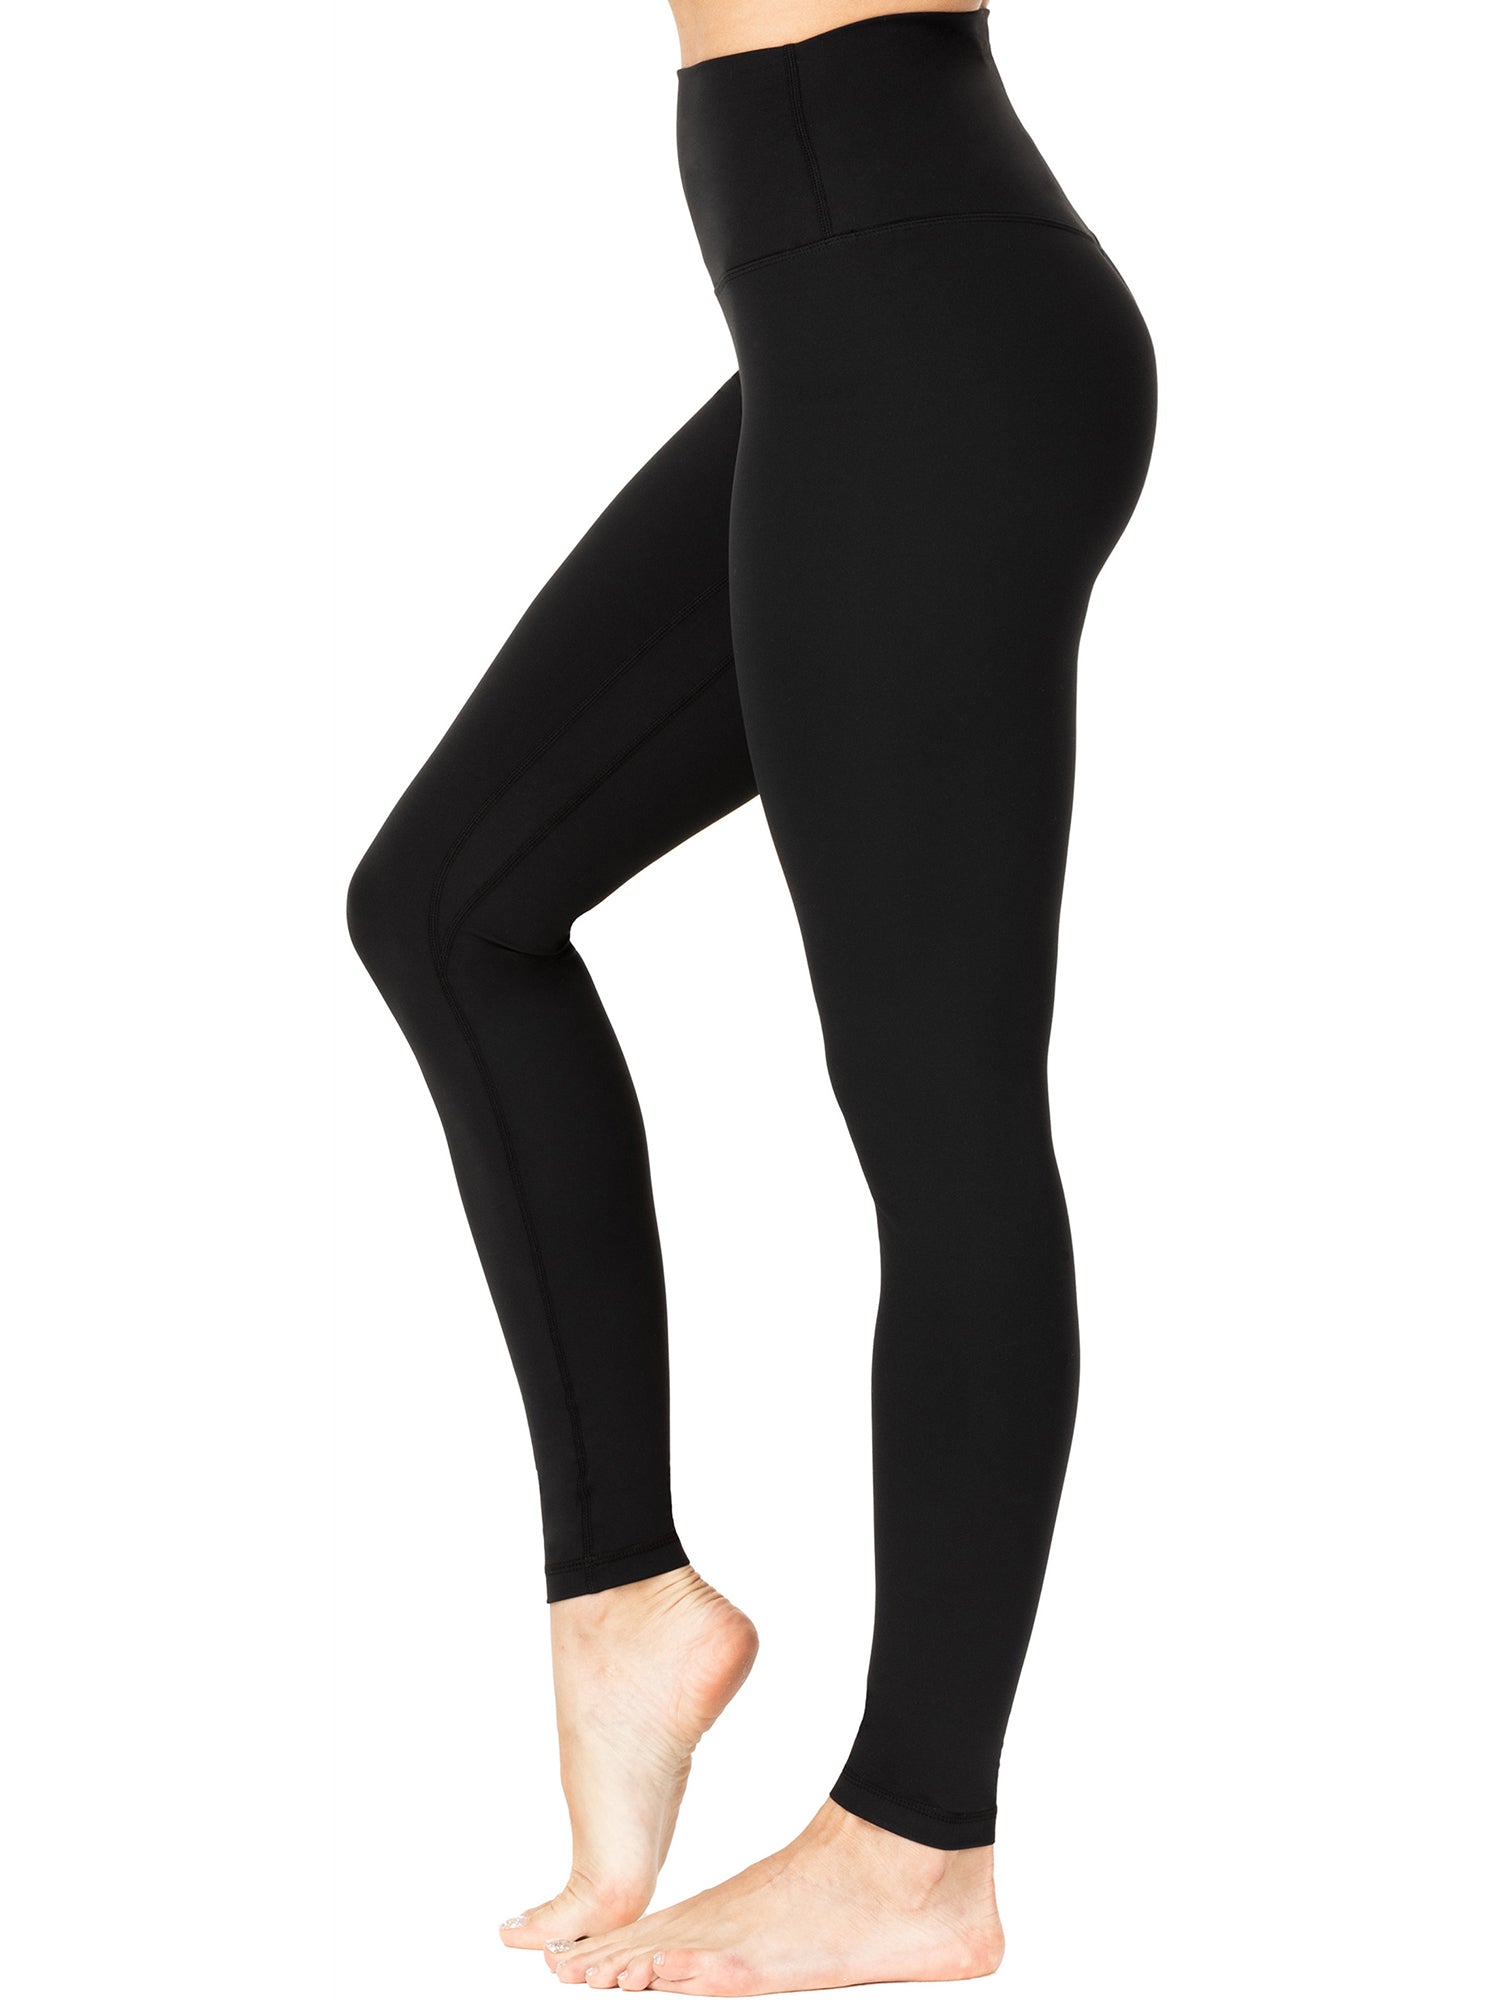 Compression Hot Pants for Yoga Wholesale Women High Waist Sports